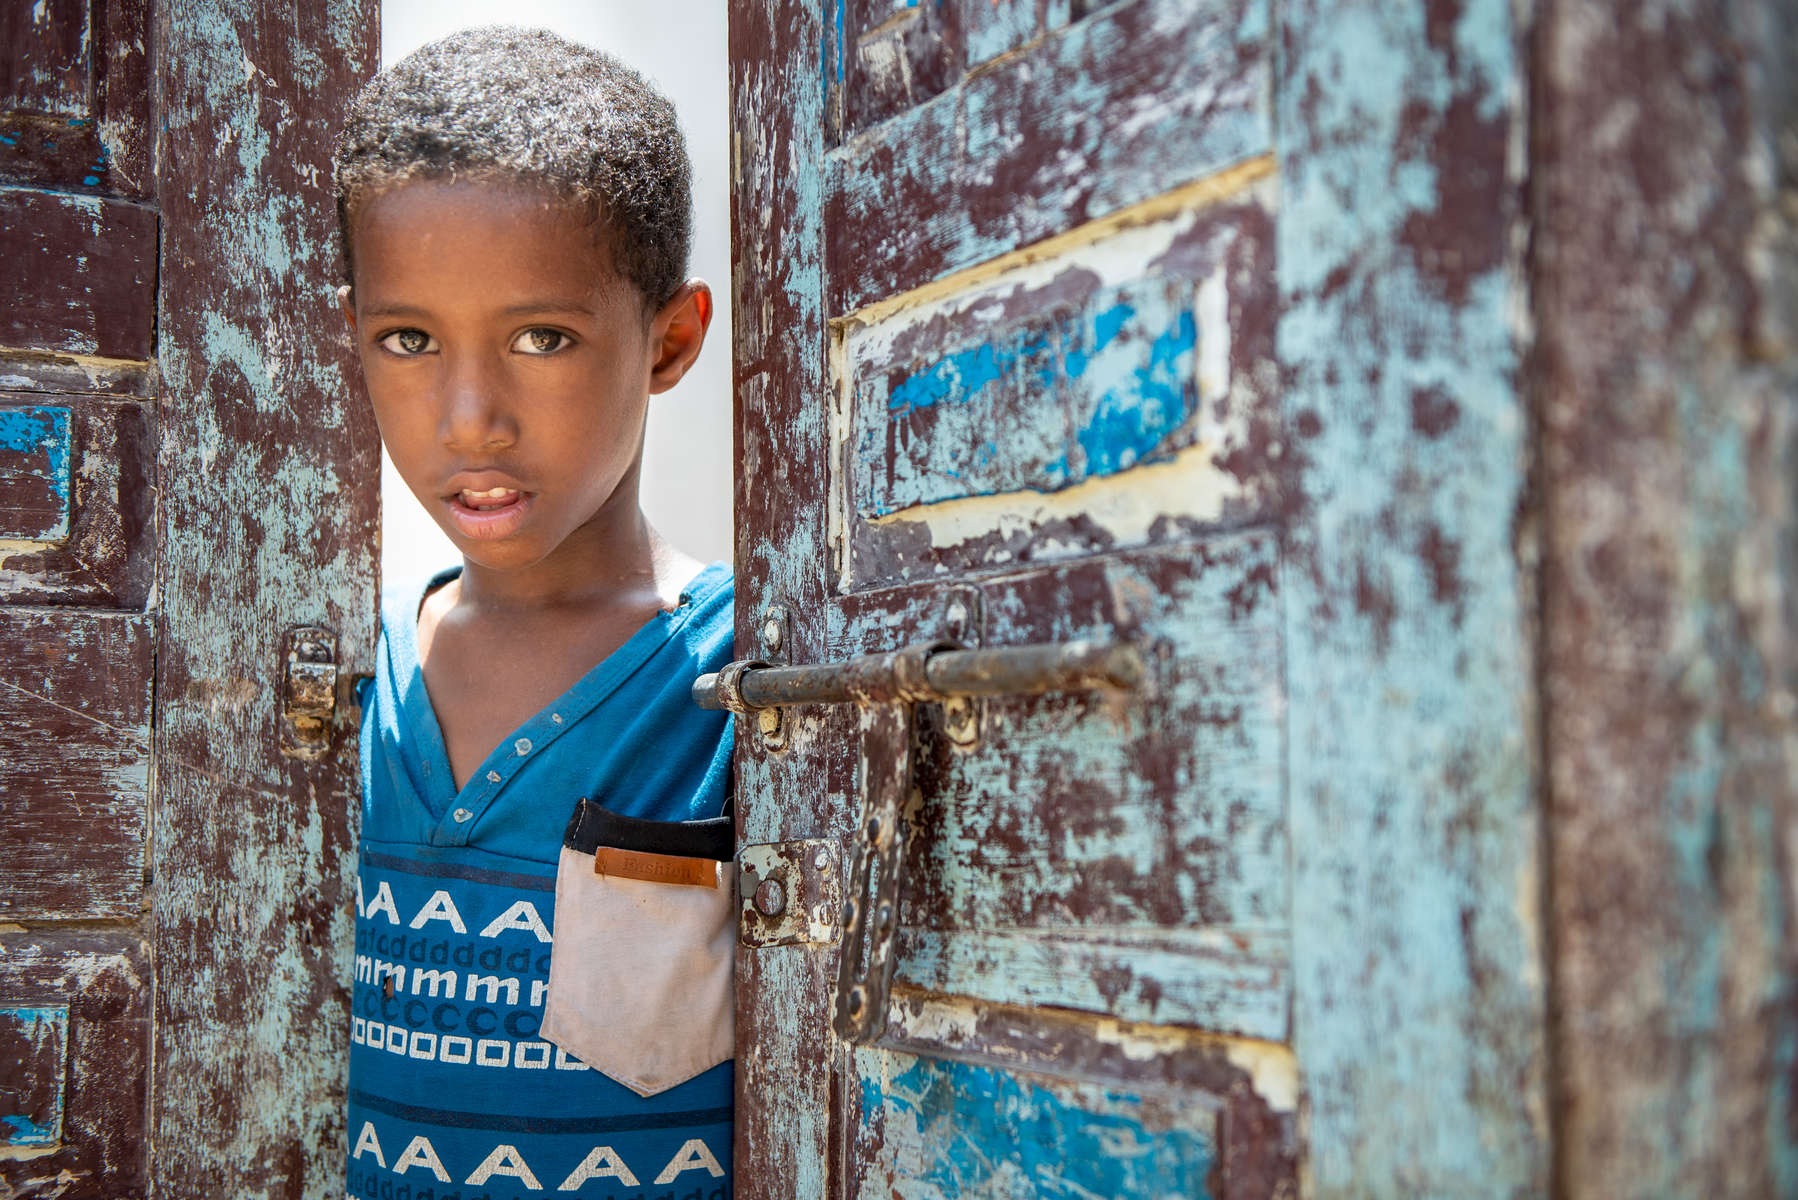 Ali, 9, peeks through the doorway of his family's home. His father Wassim used to work as a day laborer, trying to find work wherever he could to support his four children, but jobs are scarce in war-torn Yemen. He would travel far and still not be guaranteed to find enough work to support his family’s basic needs. Wassim was hired by a Mercy Corps cash-for-work project, and helped build an irrigation channel. He used the money to buy a cow and some sheep, and opened a vegetable stand, so he could begin to earn a regular income.